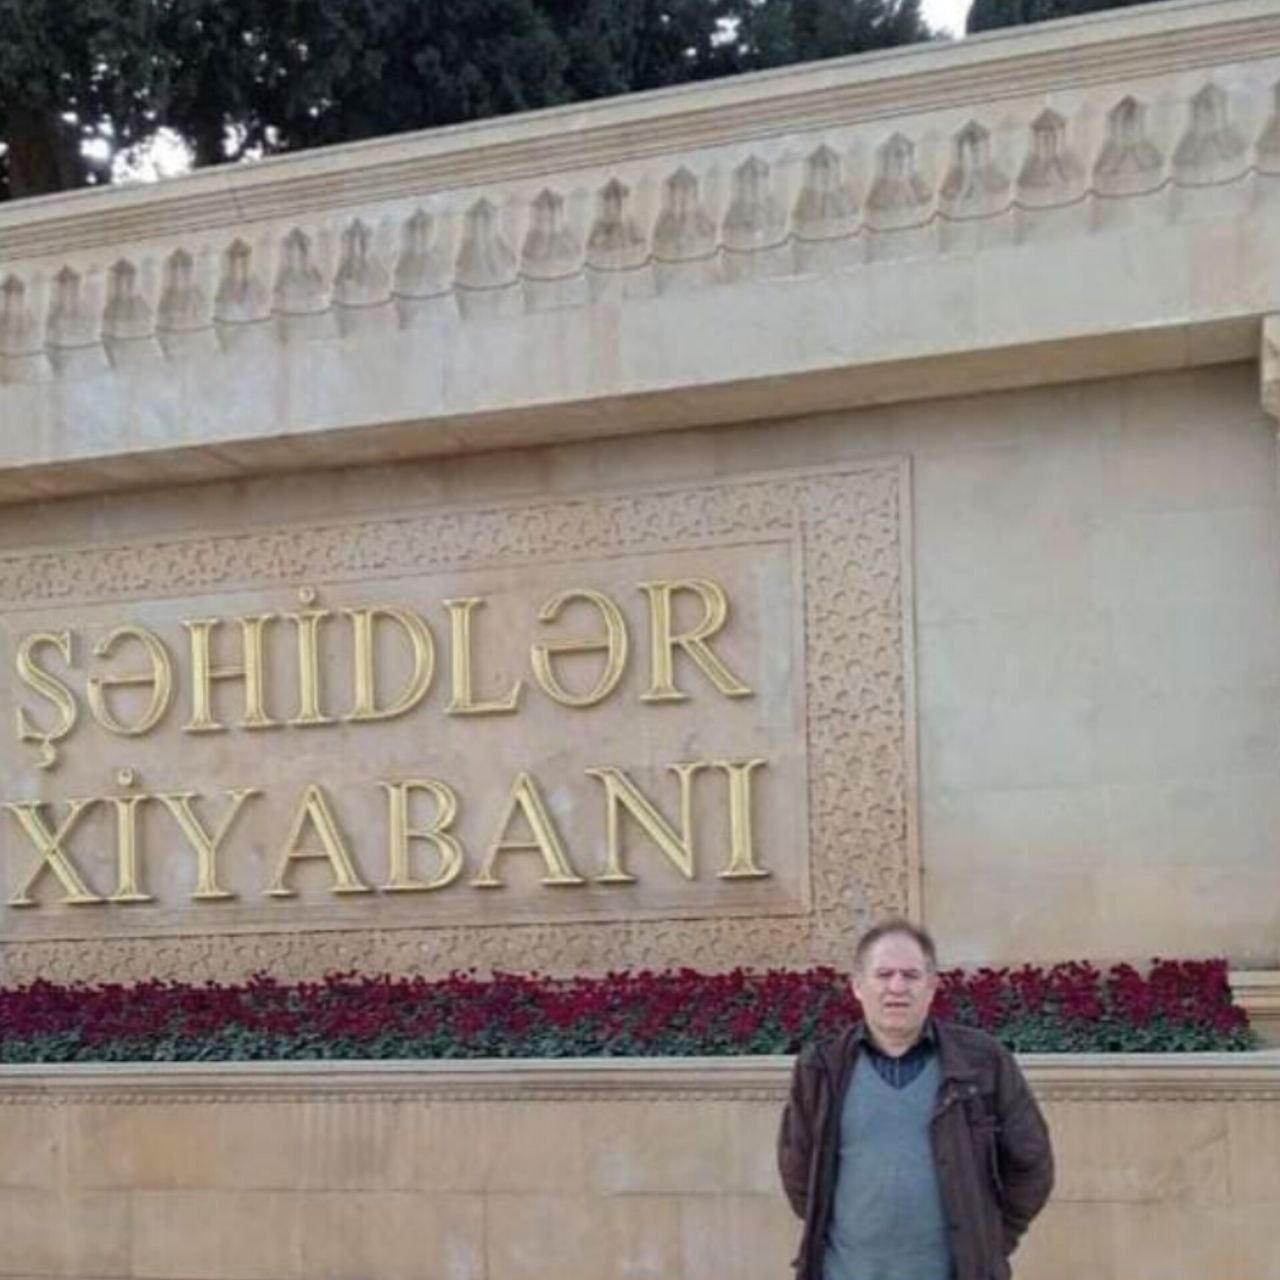 The South Azerbaijani activist was temporarily released